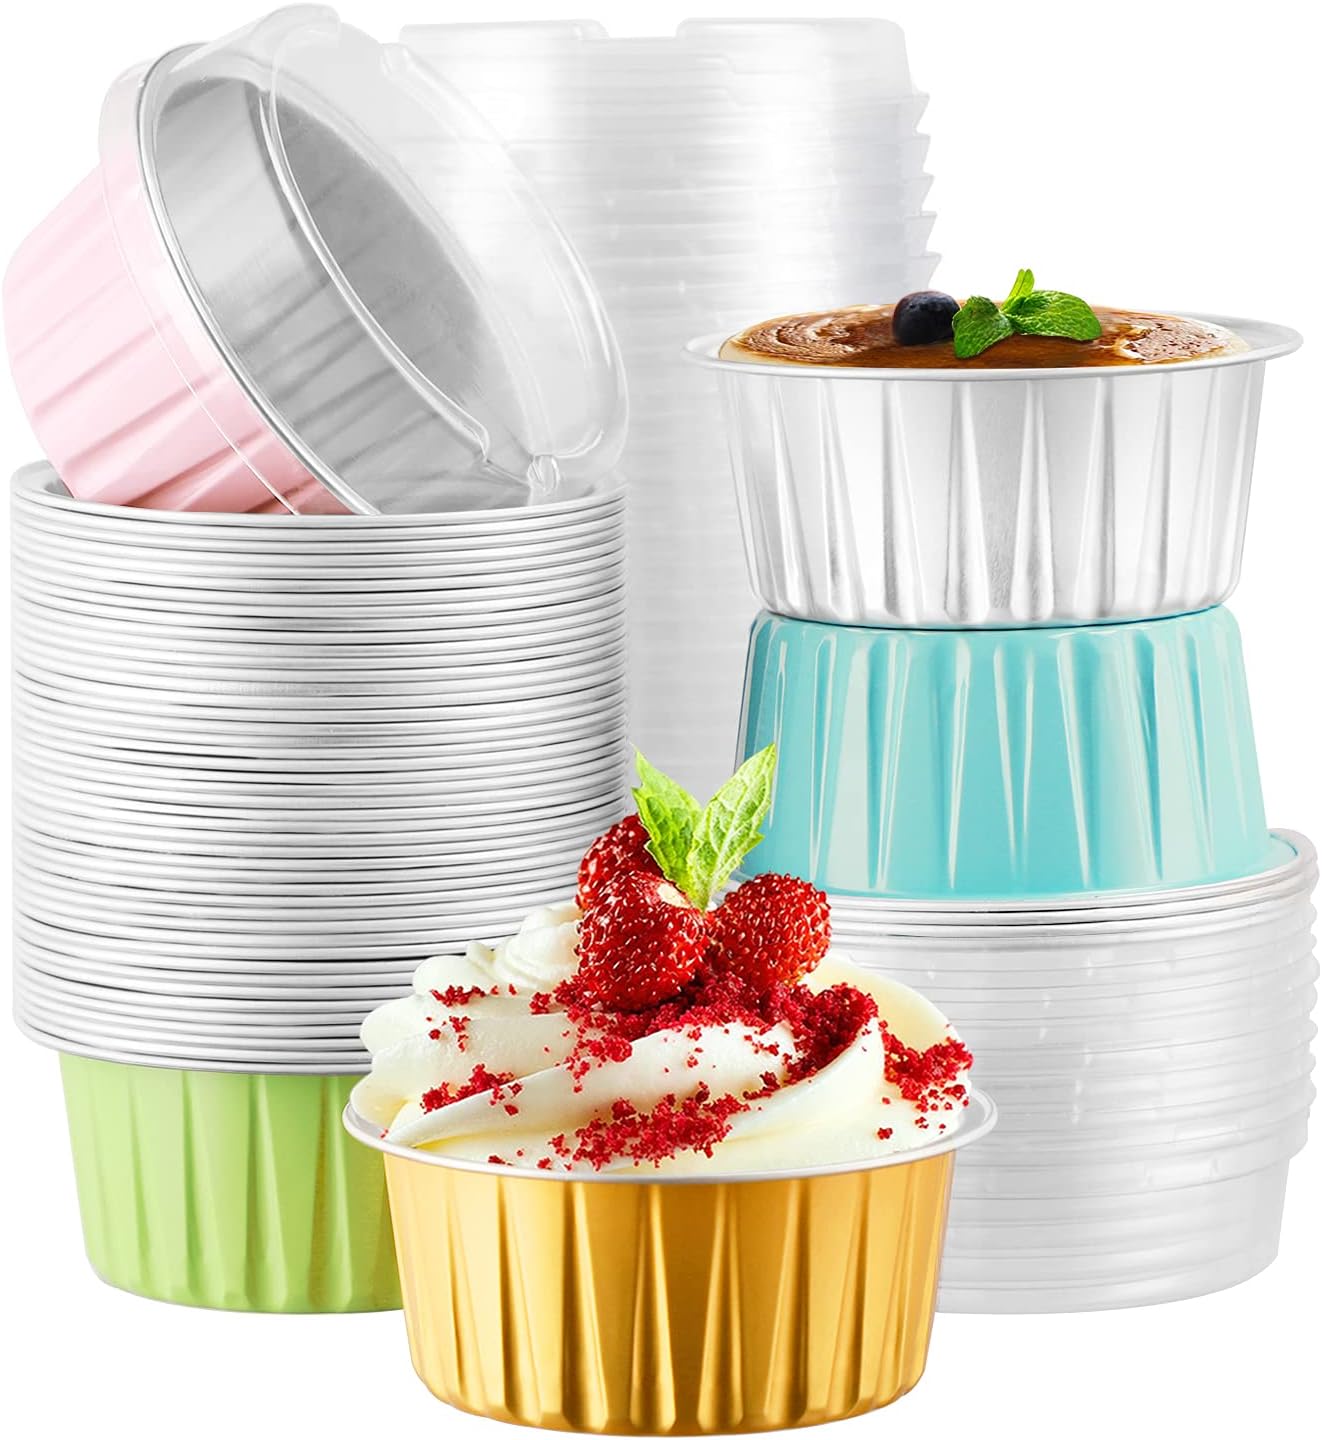 Disposable Ramekins: The 10 Best Uses For Aluminum and Foil Cups in Your Kitchen